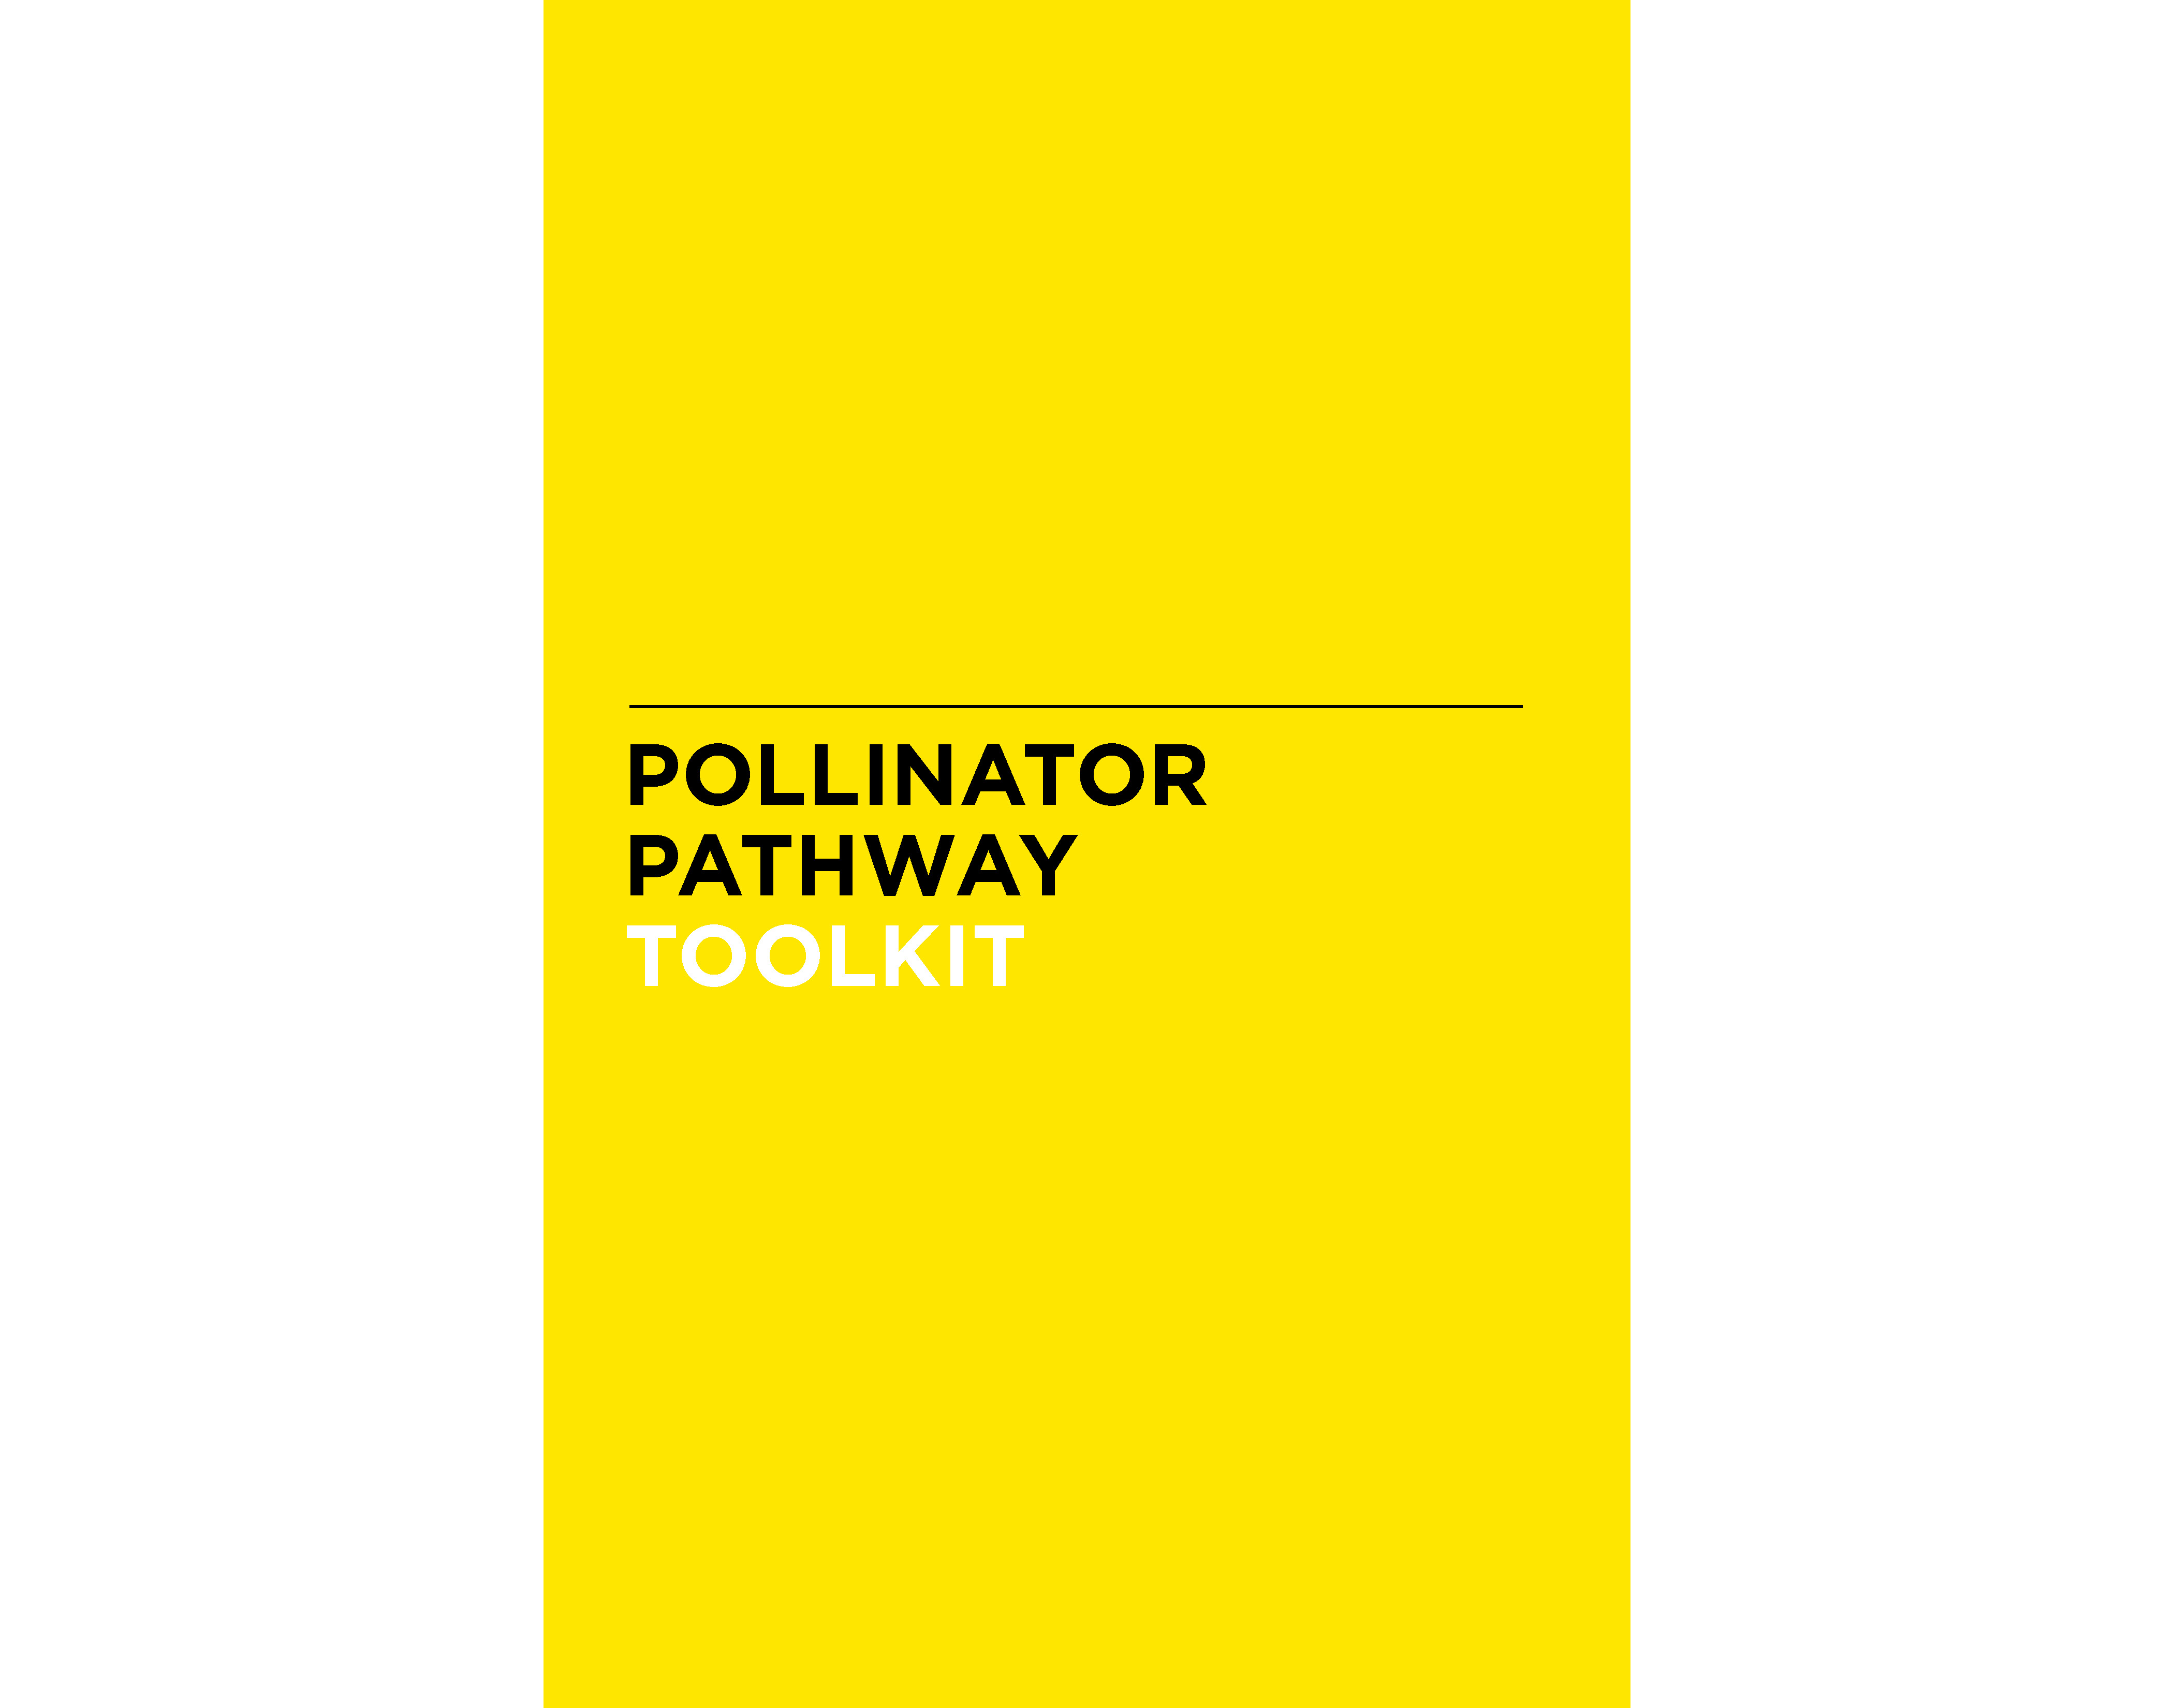 POLLINATOR-PATHWAY-TOOLKIT_Page_1